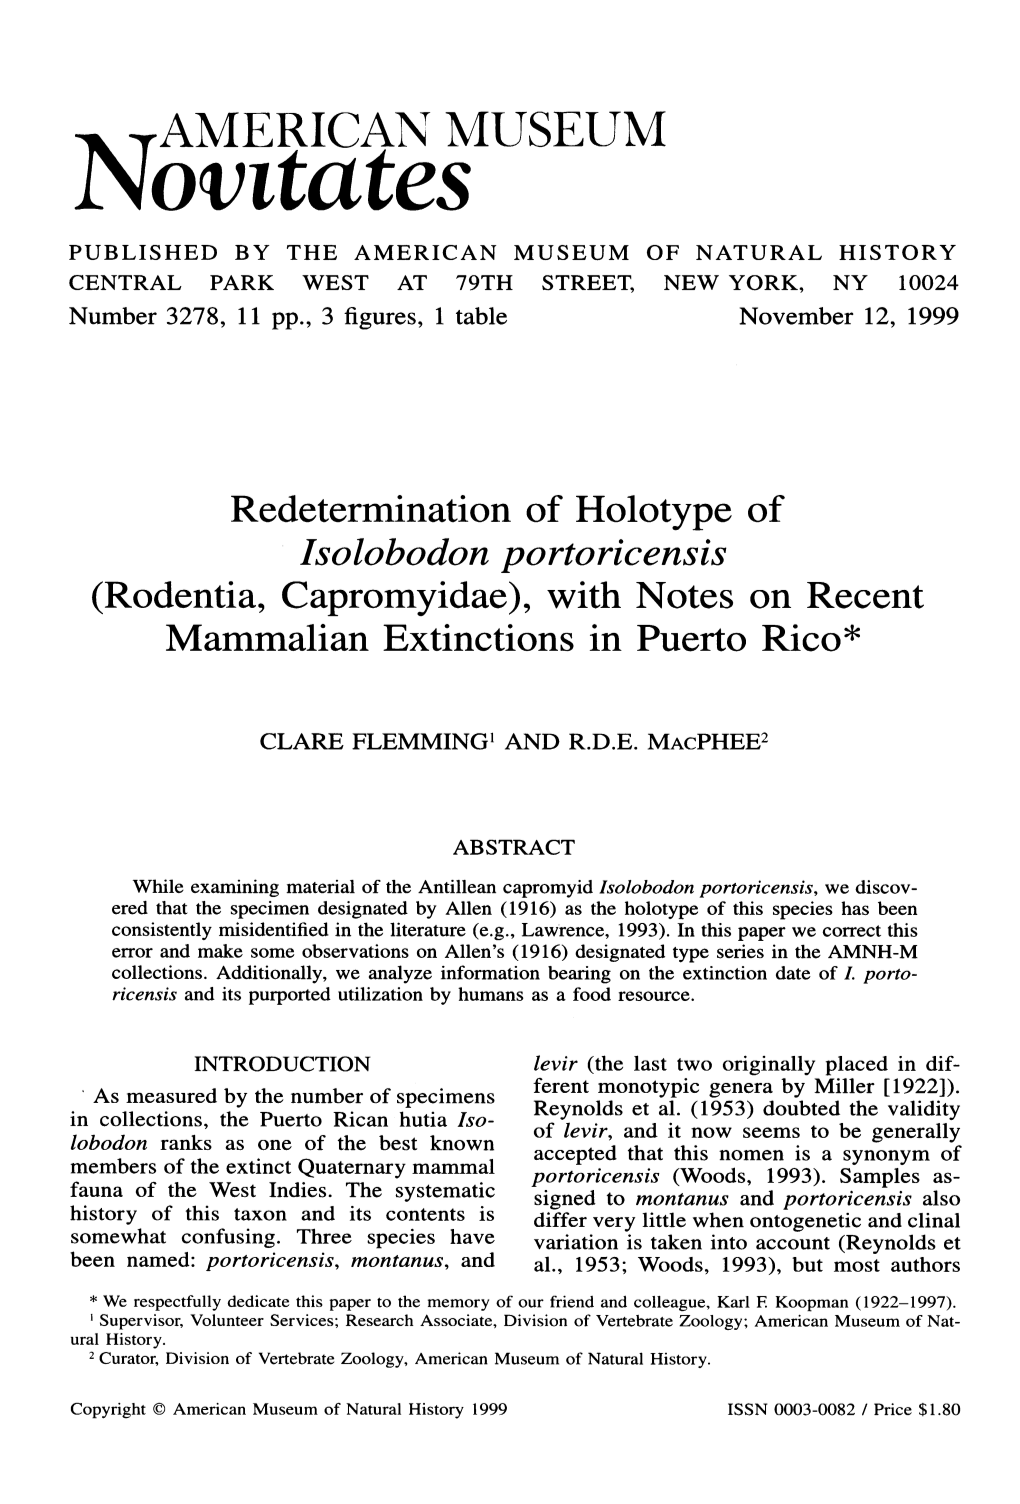 Isolobodon Portoricensis (Rodentia, Capromyidae), with Notes on Recent Mammalian Extinctions in Puerto Rico*